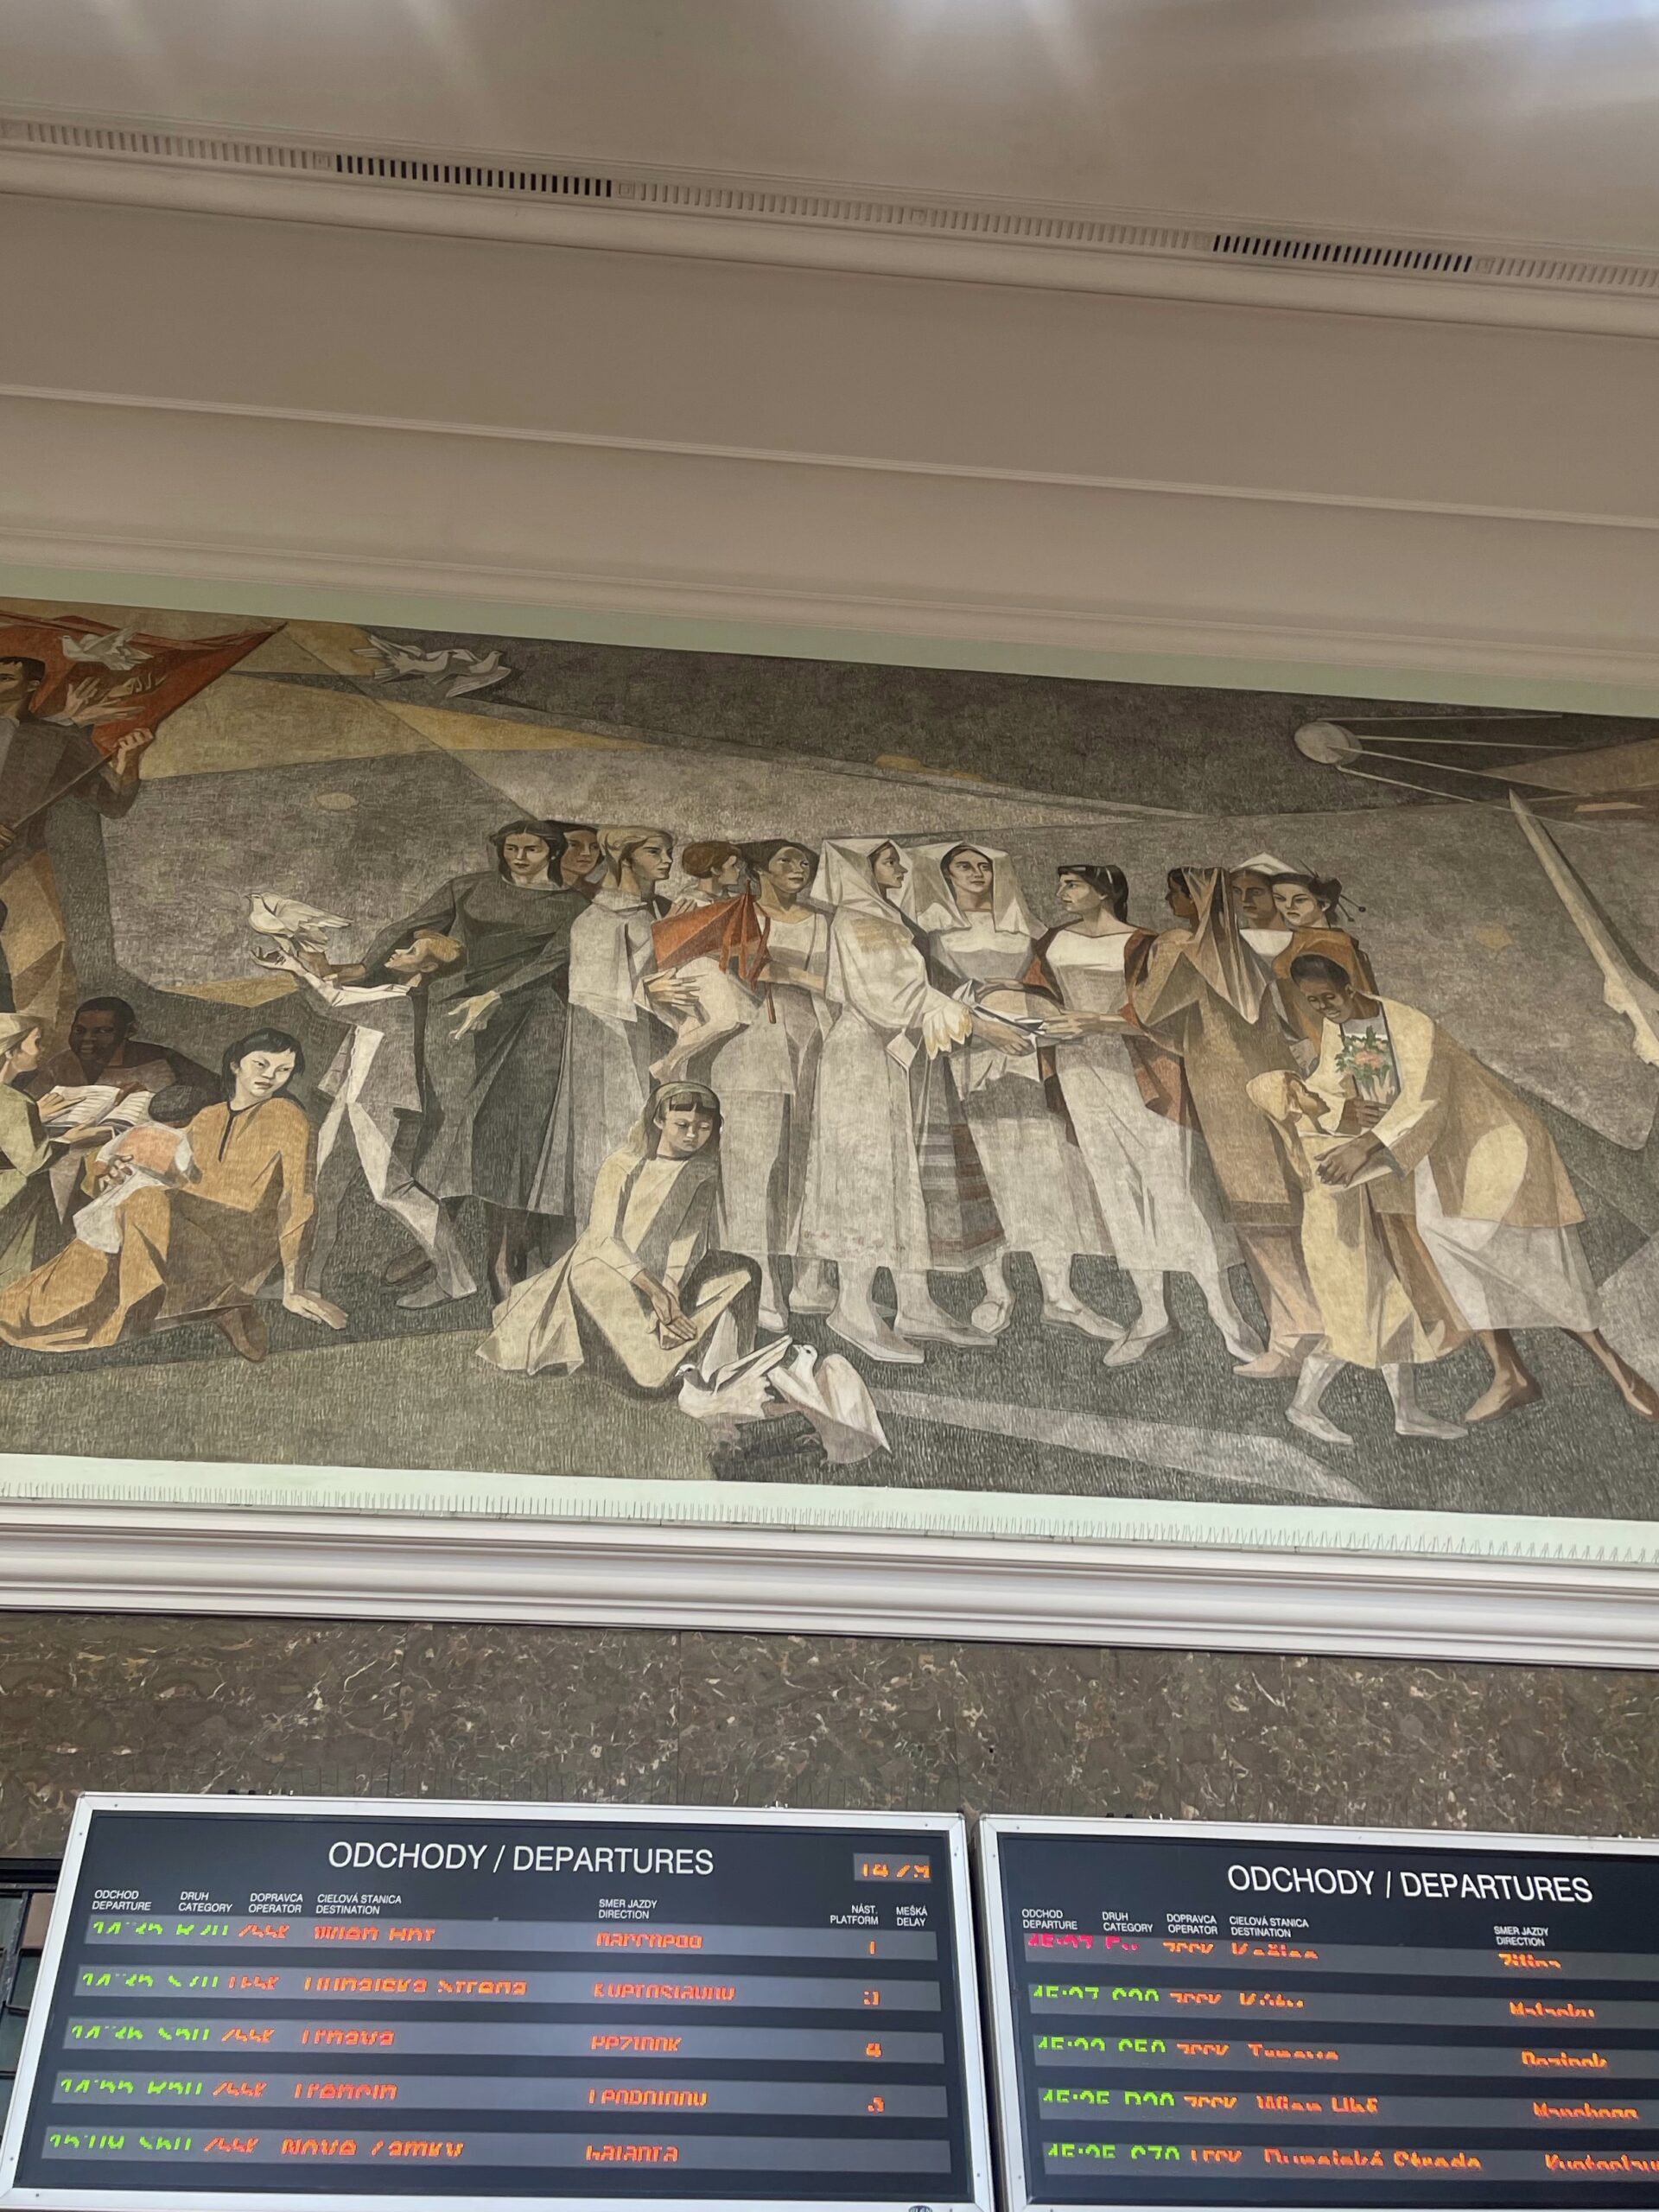 photo pf a mosaic above the departure boards. It has historically dressed people on it